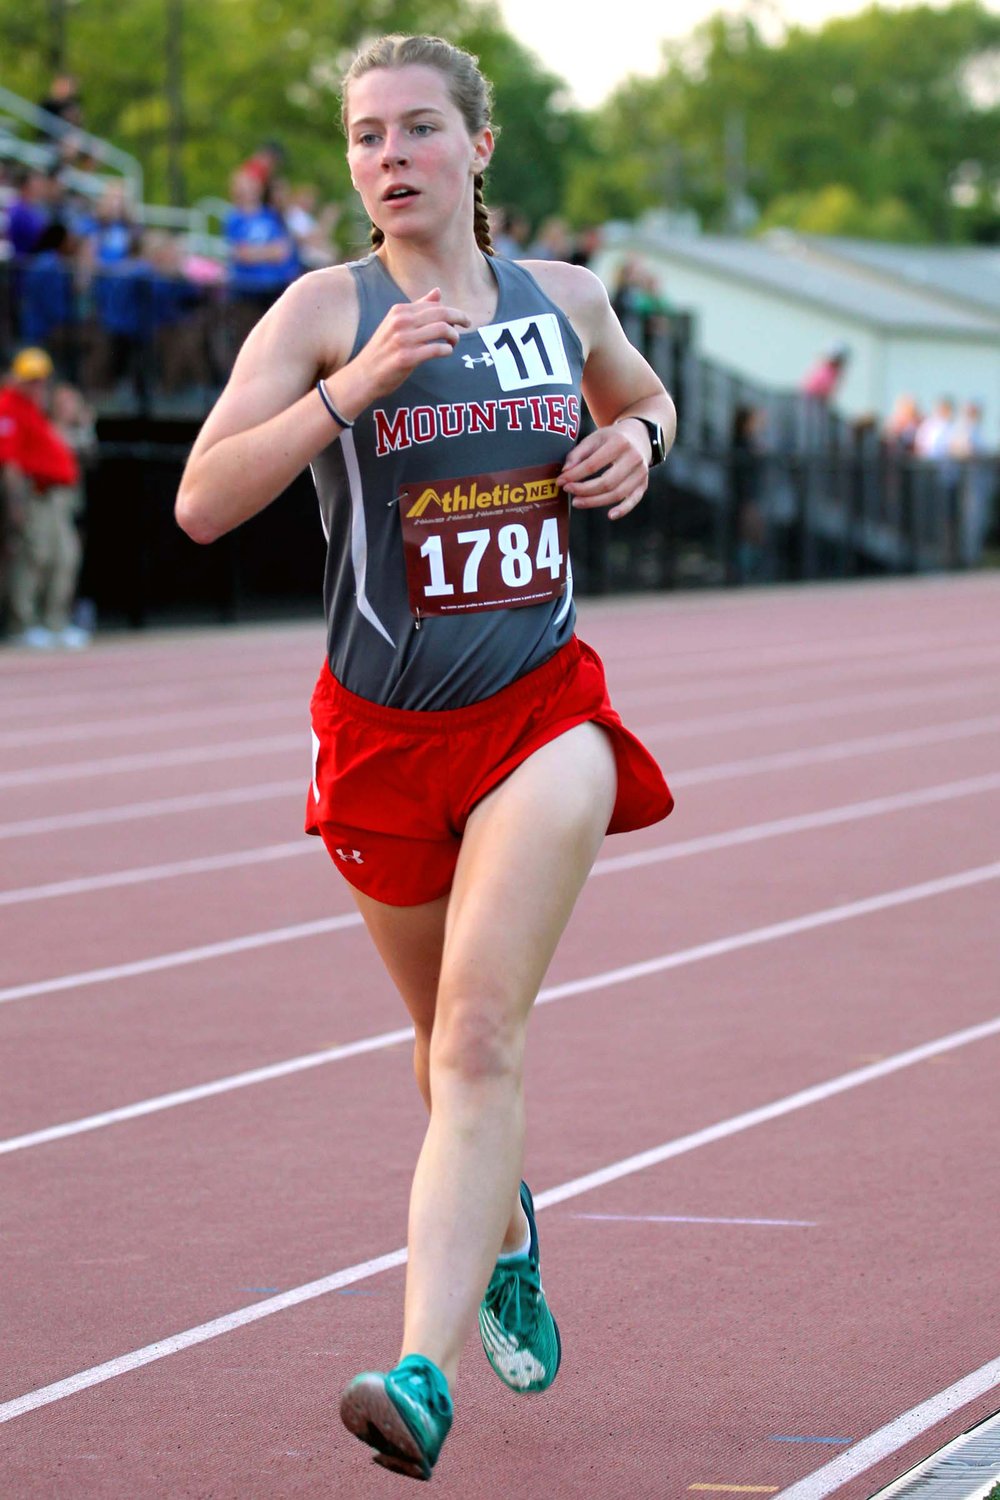 Junior Faith Allen of Southmont ran the 3200m at the Lafayette Jefferson track regional in a time of 12:02.44.